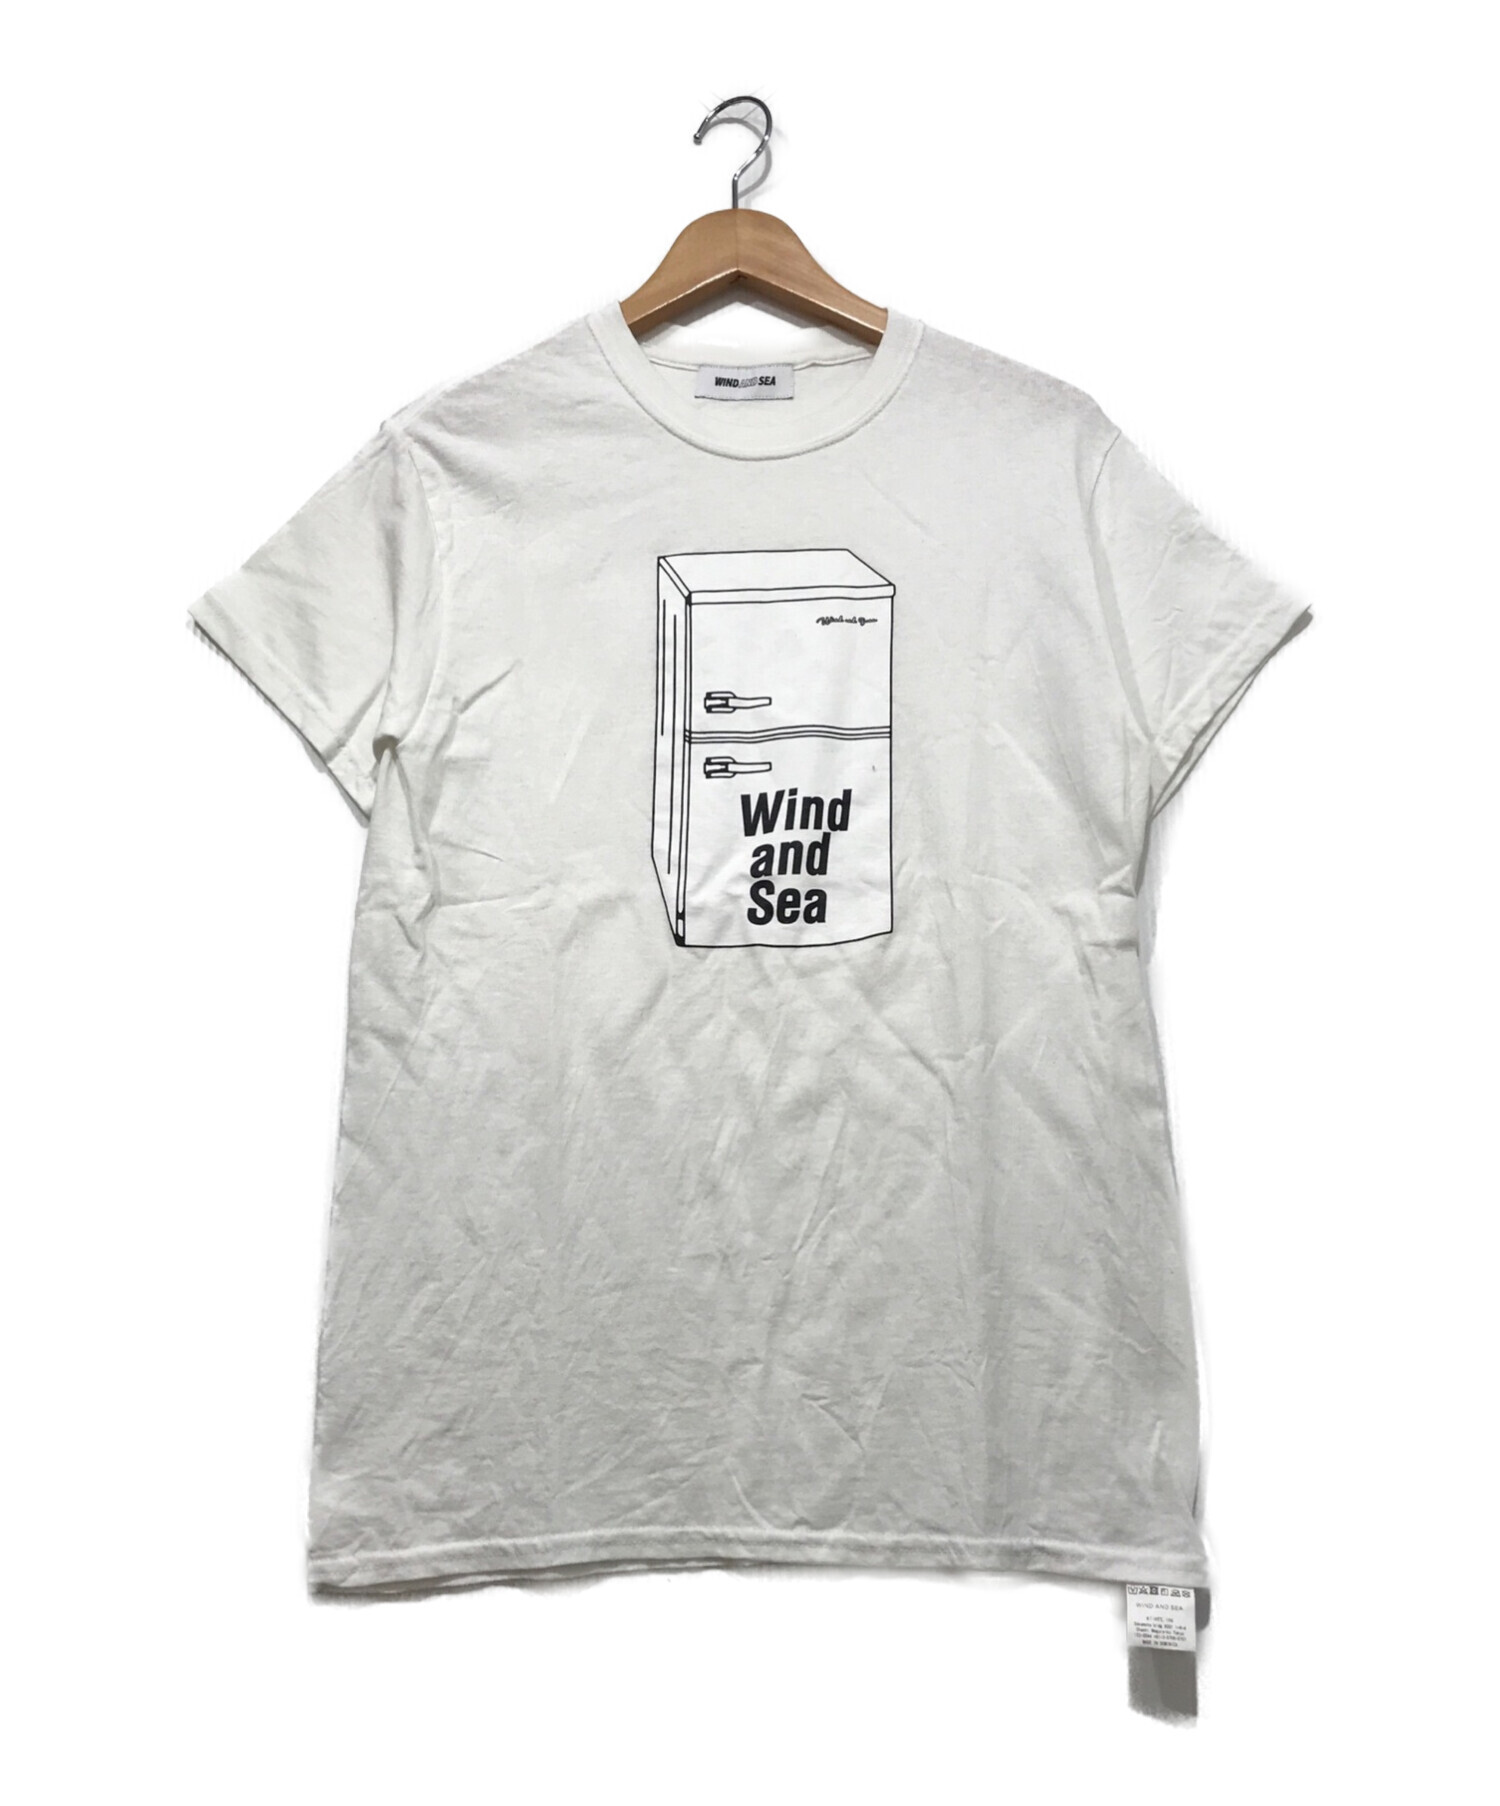 WIND AND SEA ウィン ダンシー SEA (SPC) T-SHIRT-eastgate.mk